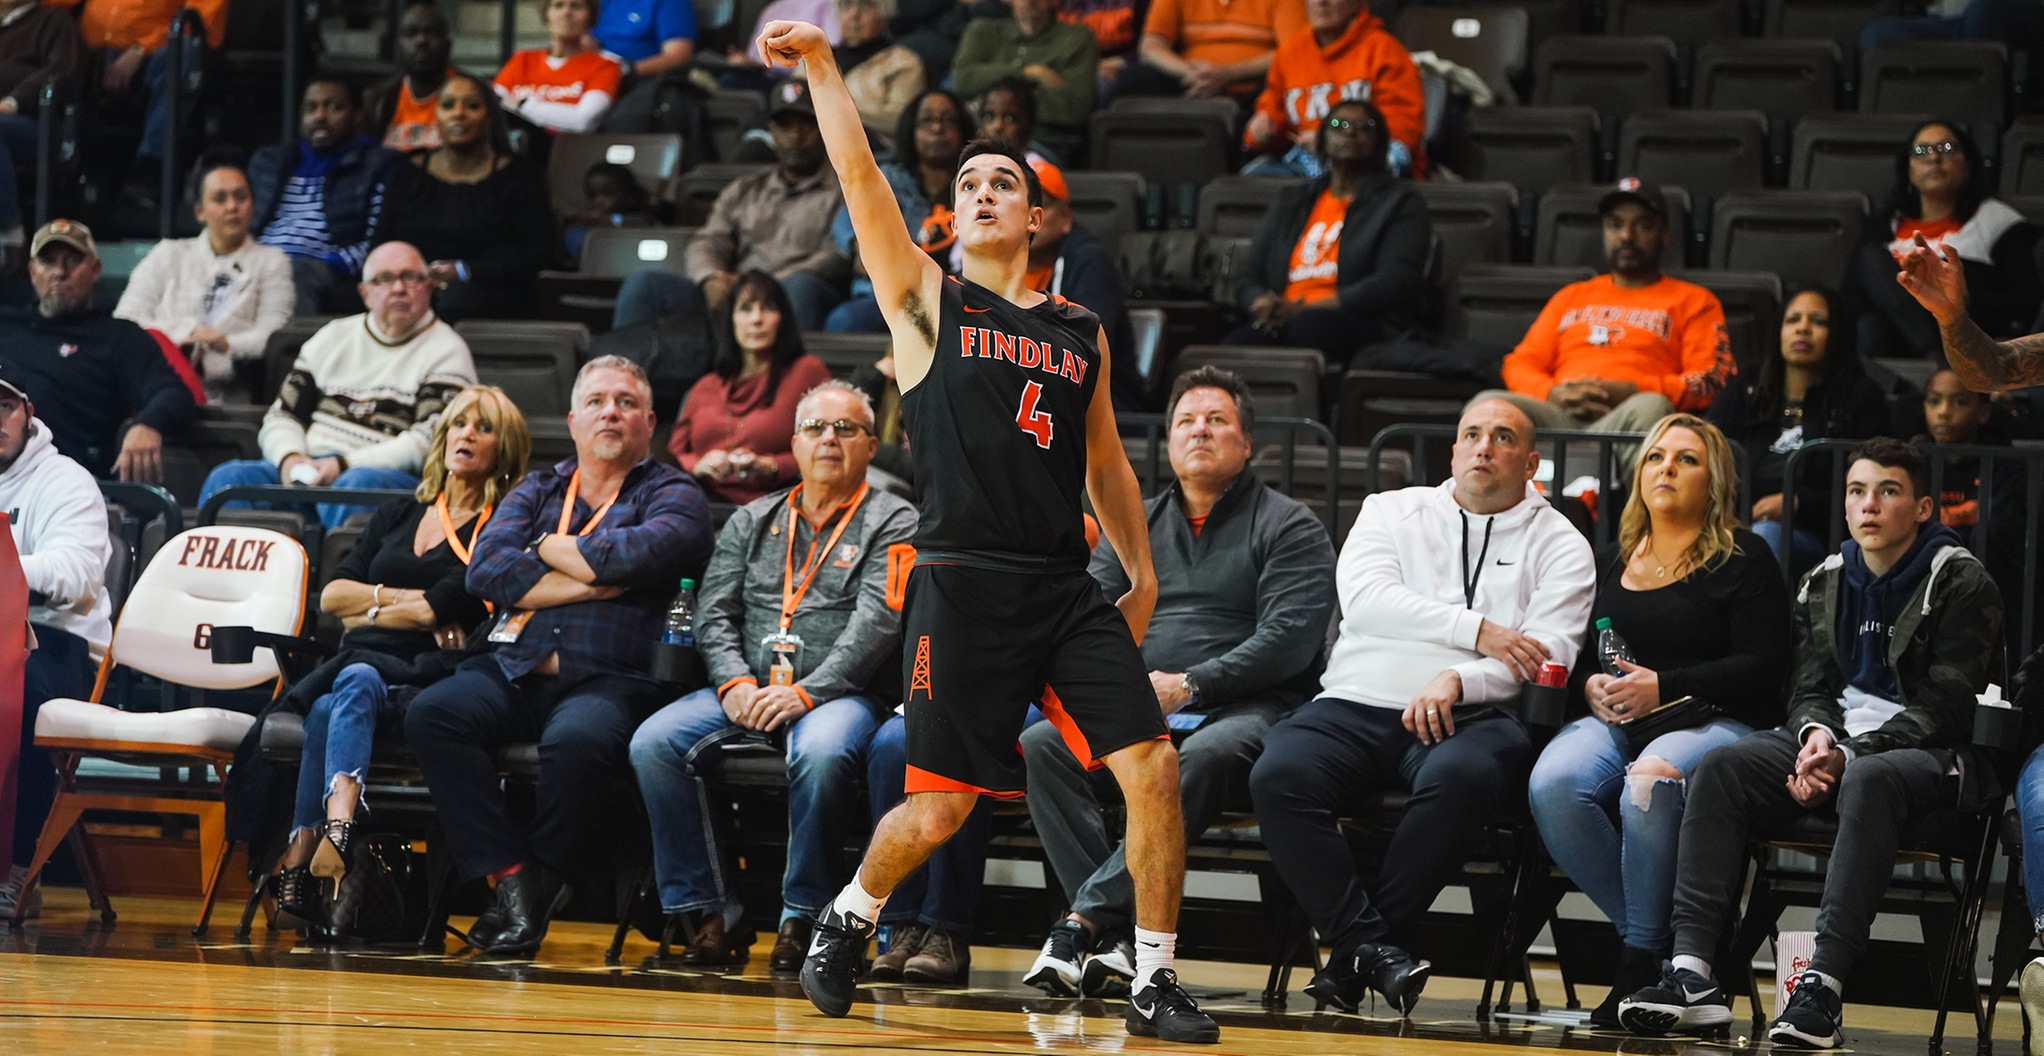 Oilers Grind Out 76-67 Win Over Battlers